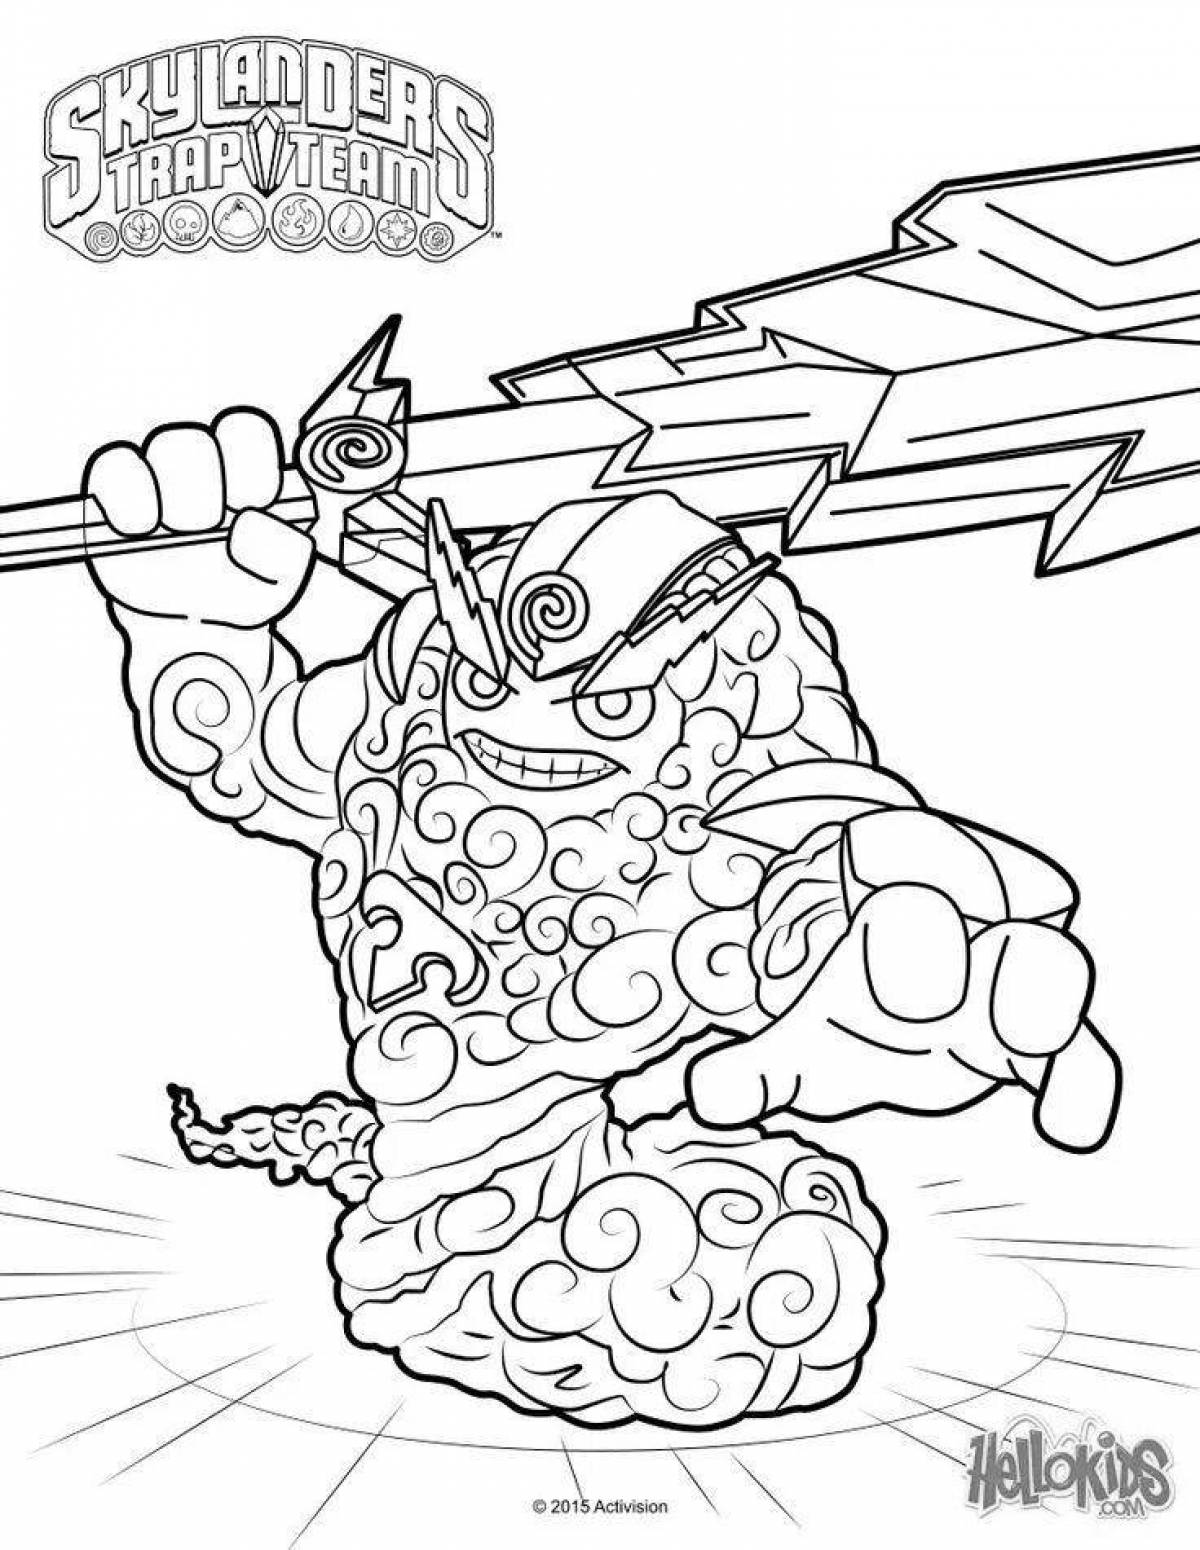 Funny screamers coloring pages for kids